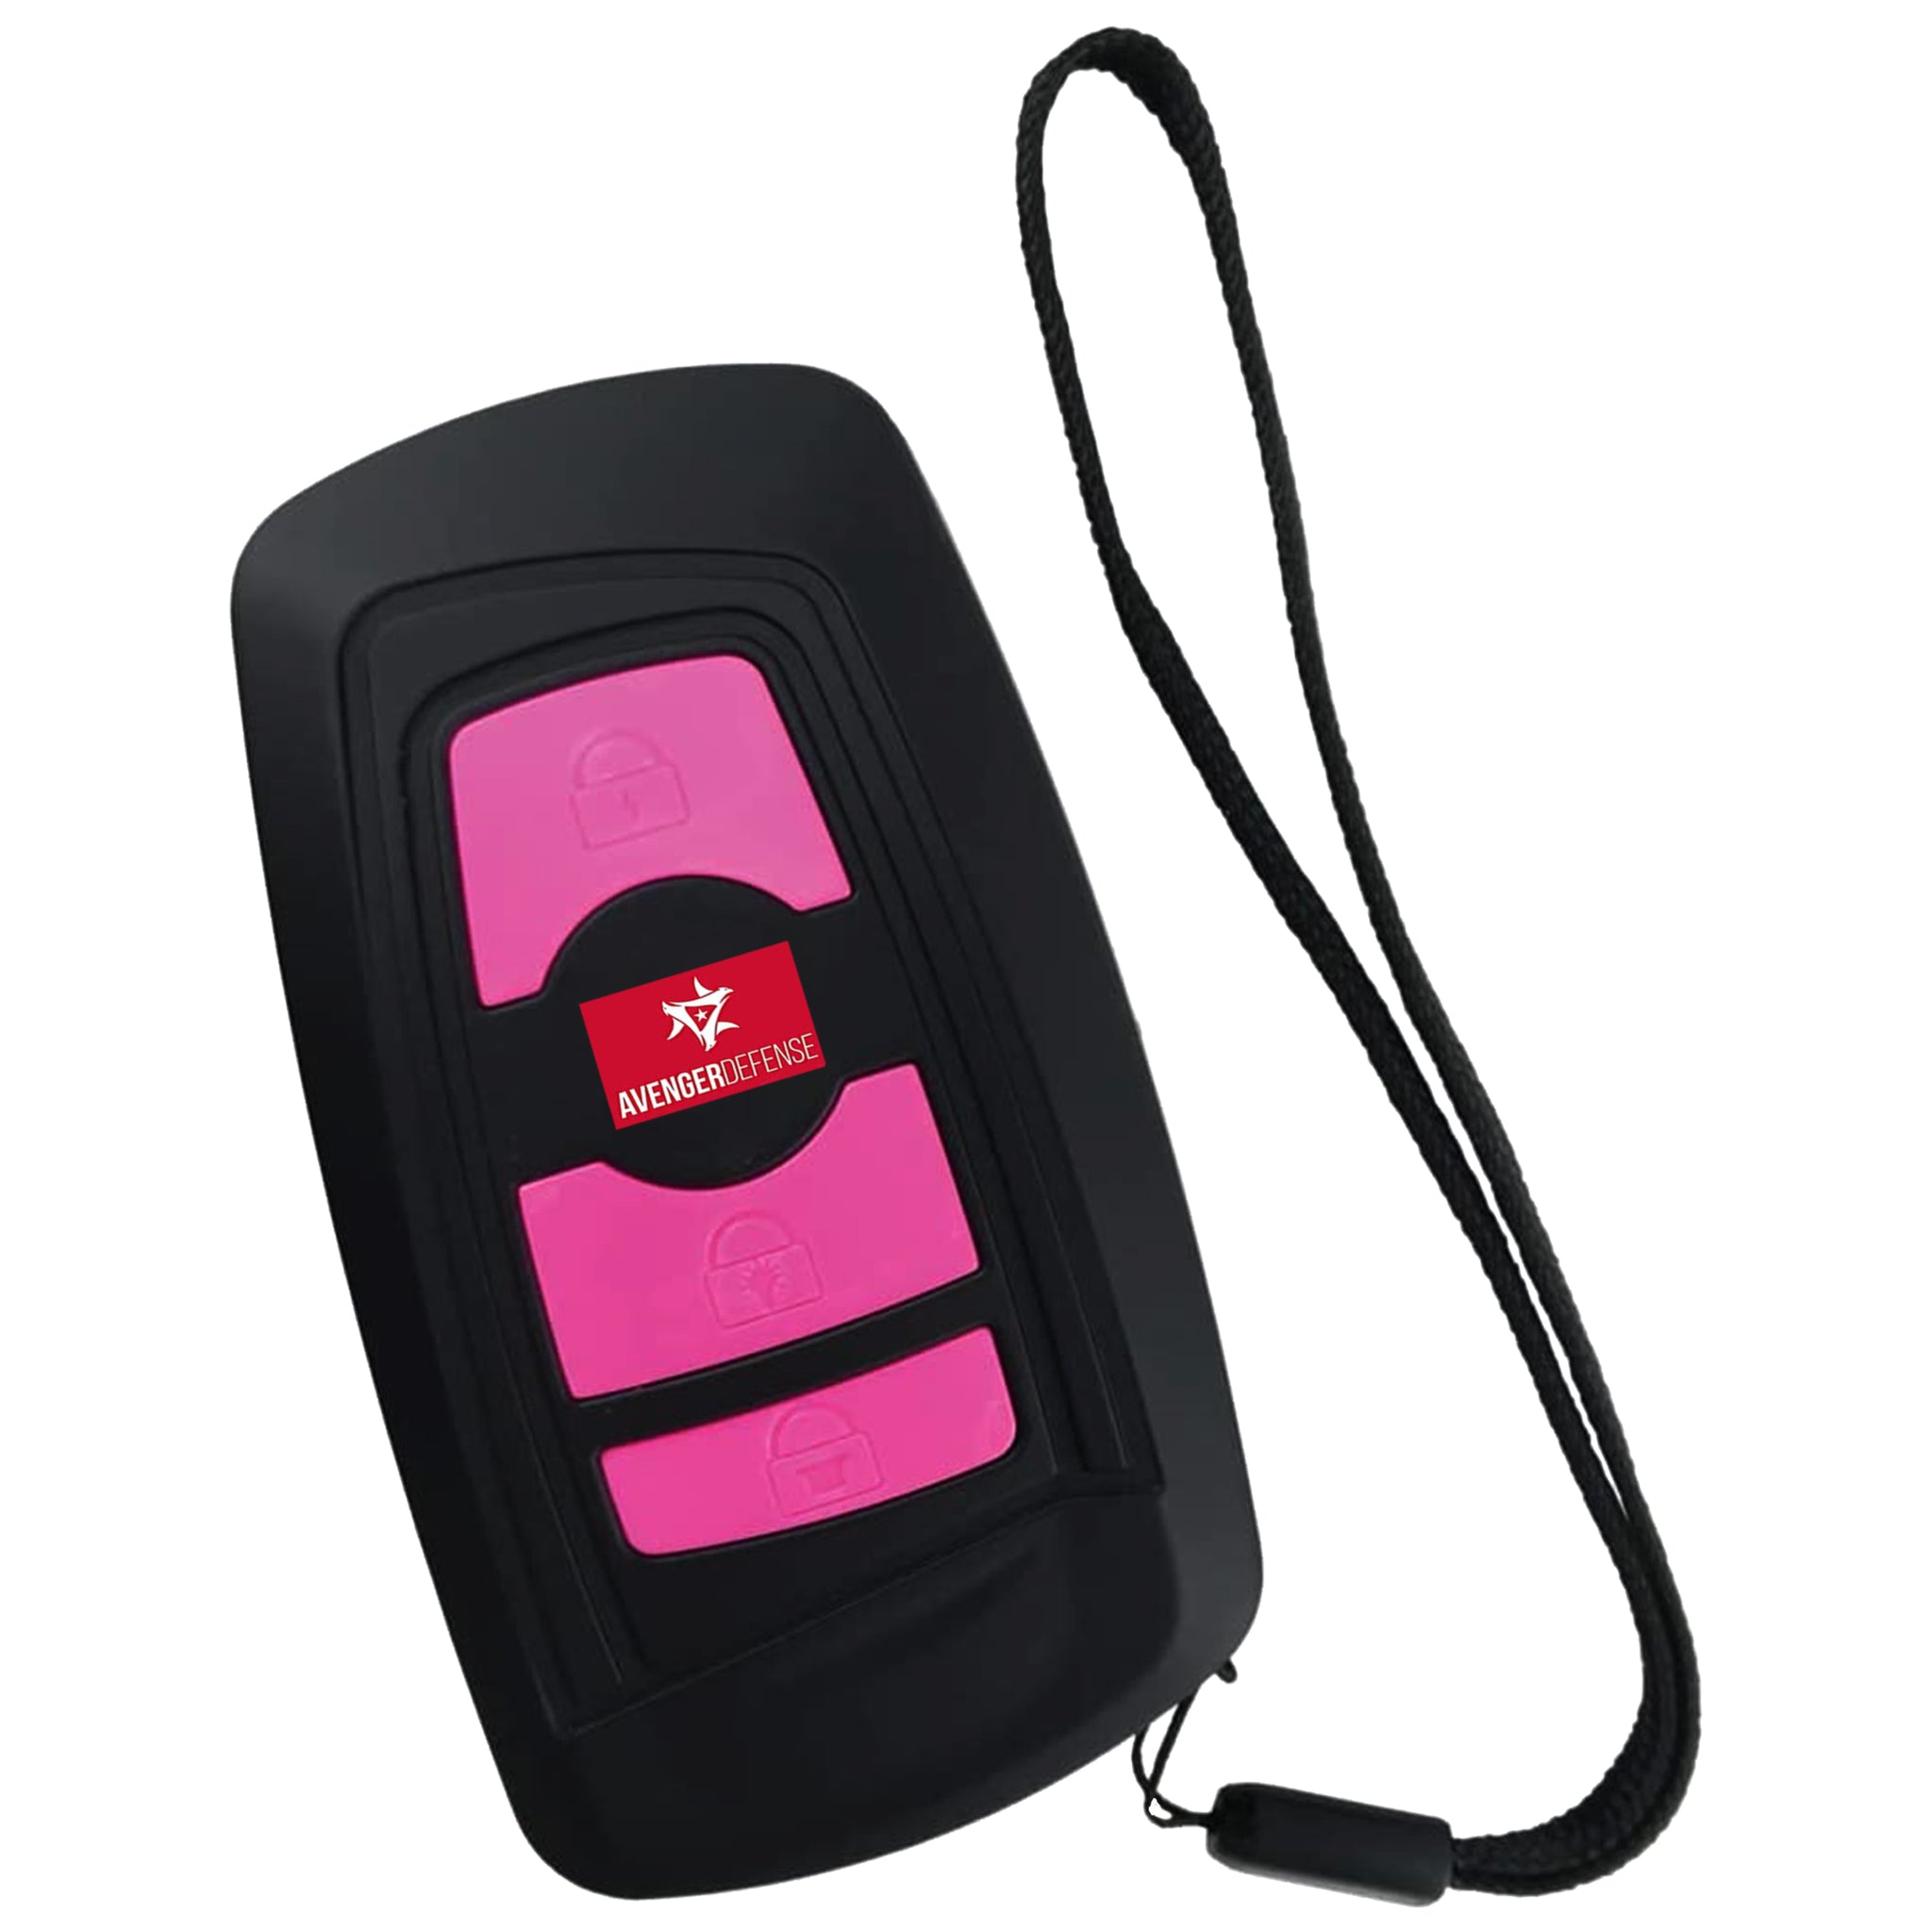 Avenger Defense ADS-70B - Mini Stun Gun Key fob Design with Security Alarm – Rechargeable 1.2 µC Charge Powerful Self Defense – LED Flashlight and Wrist Strap - Black, Pink